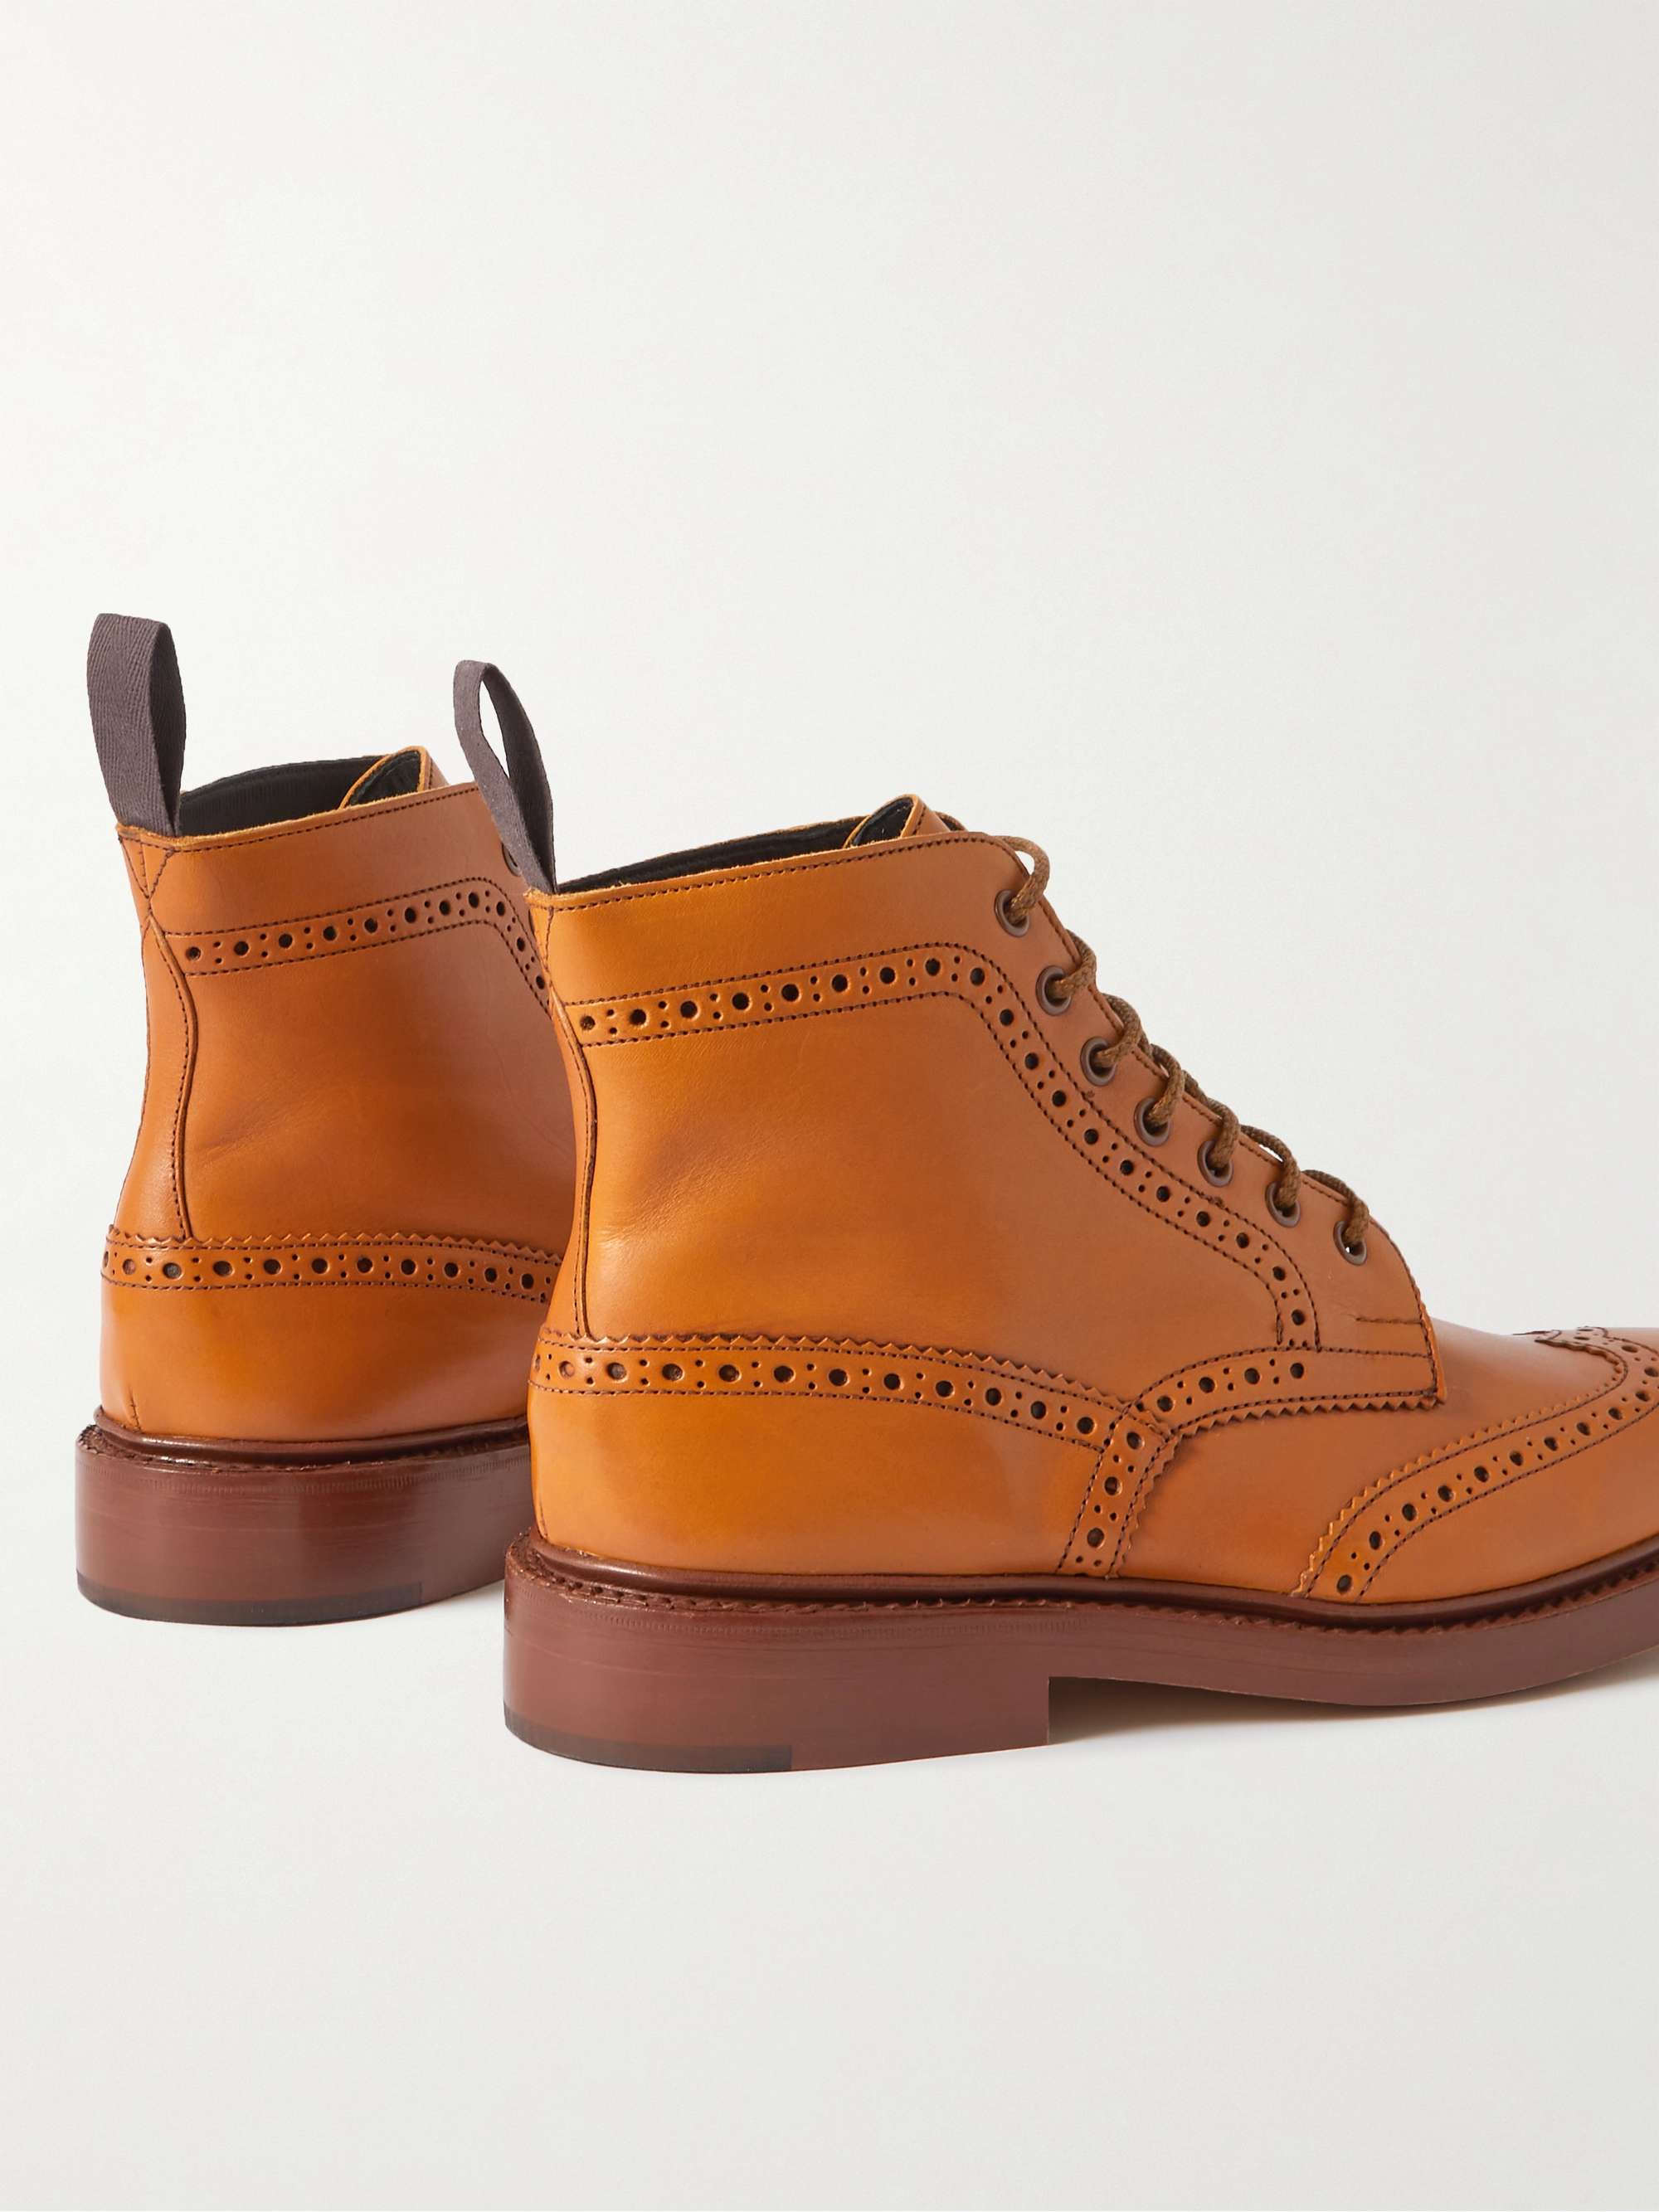 TRICKER'S Stow Leather Brogue Boots